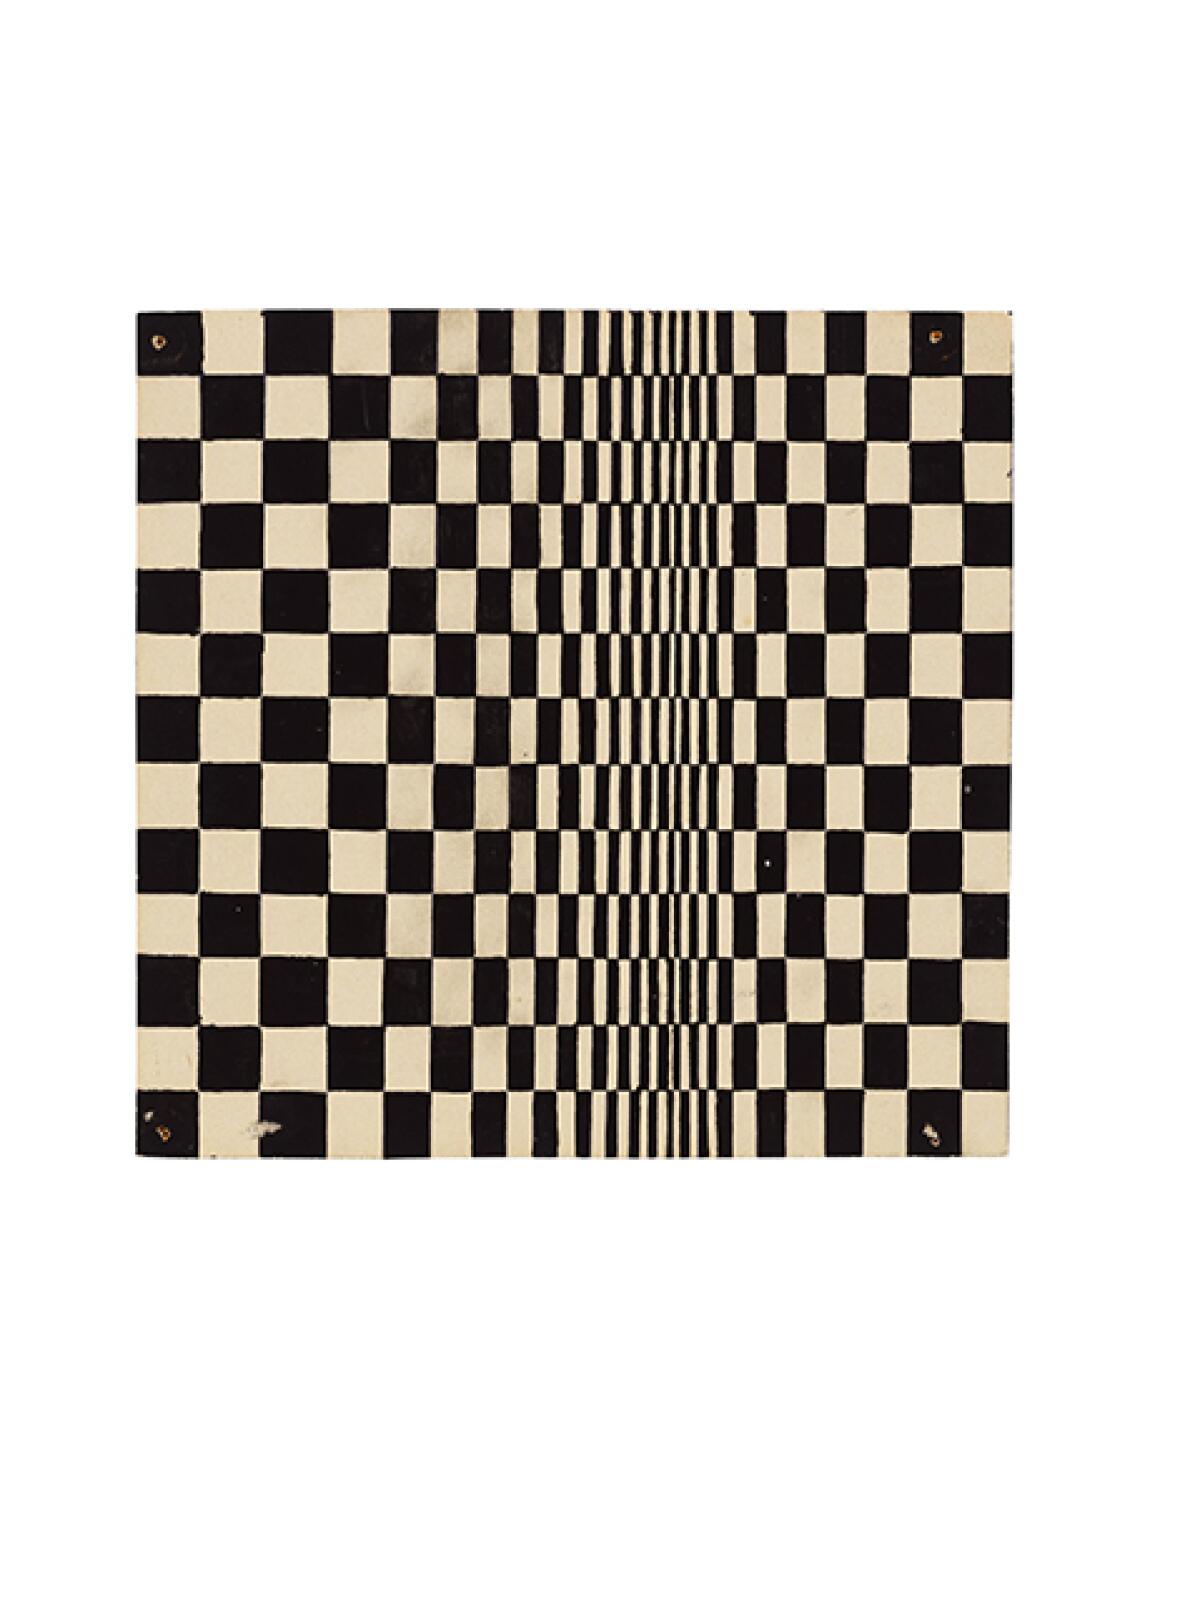 A grid of black and white squares that appear to be moving.